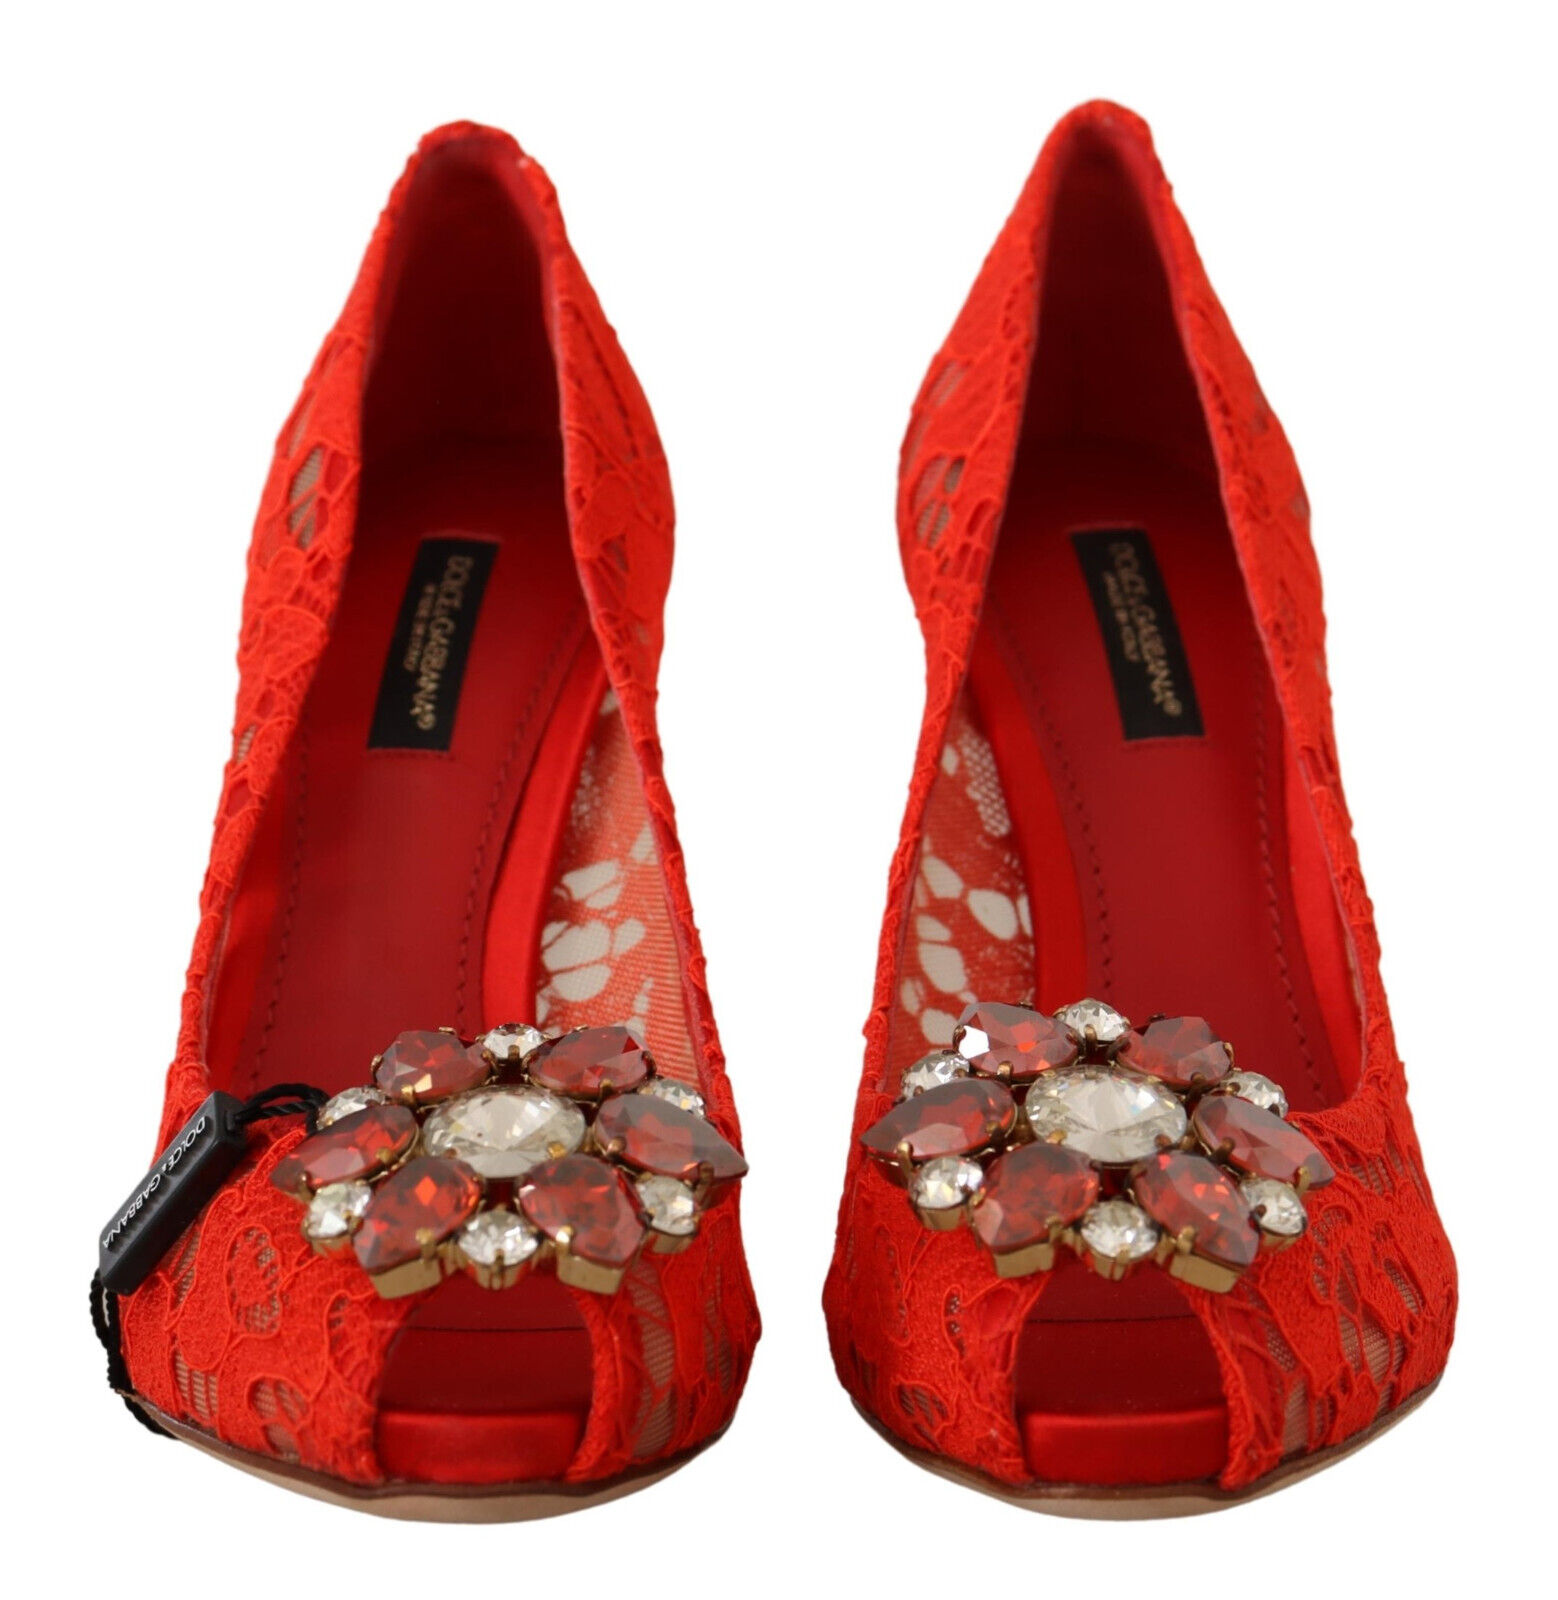 Pre-owned Dolce & Gabbana Shoes Red Taormina Lace Crystal Heels Pumps Eu35 / Us4.5 $1100